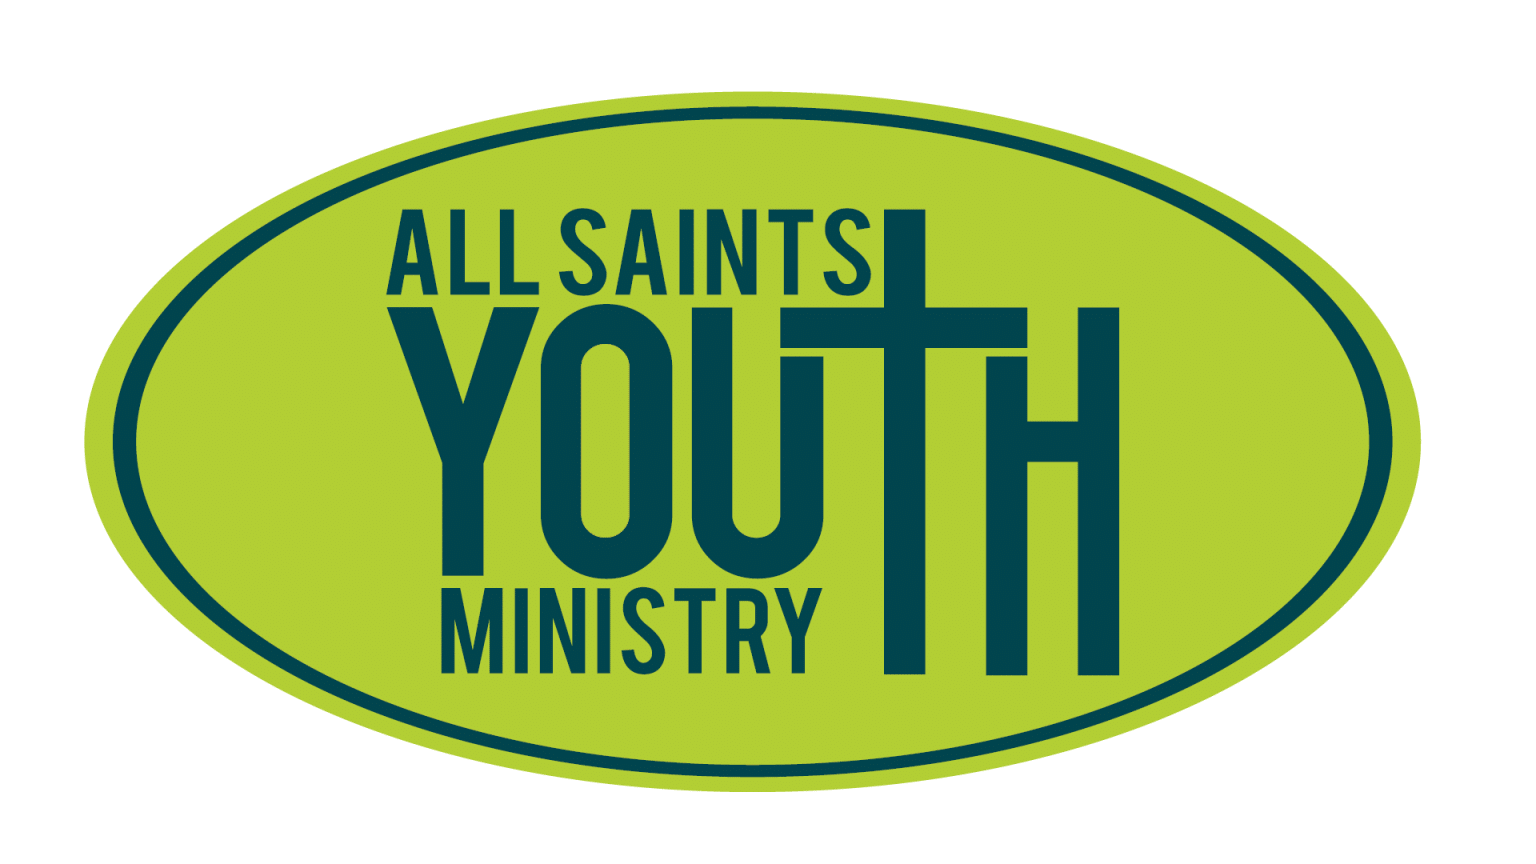 All Saints Youth Ministry